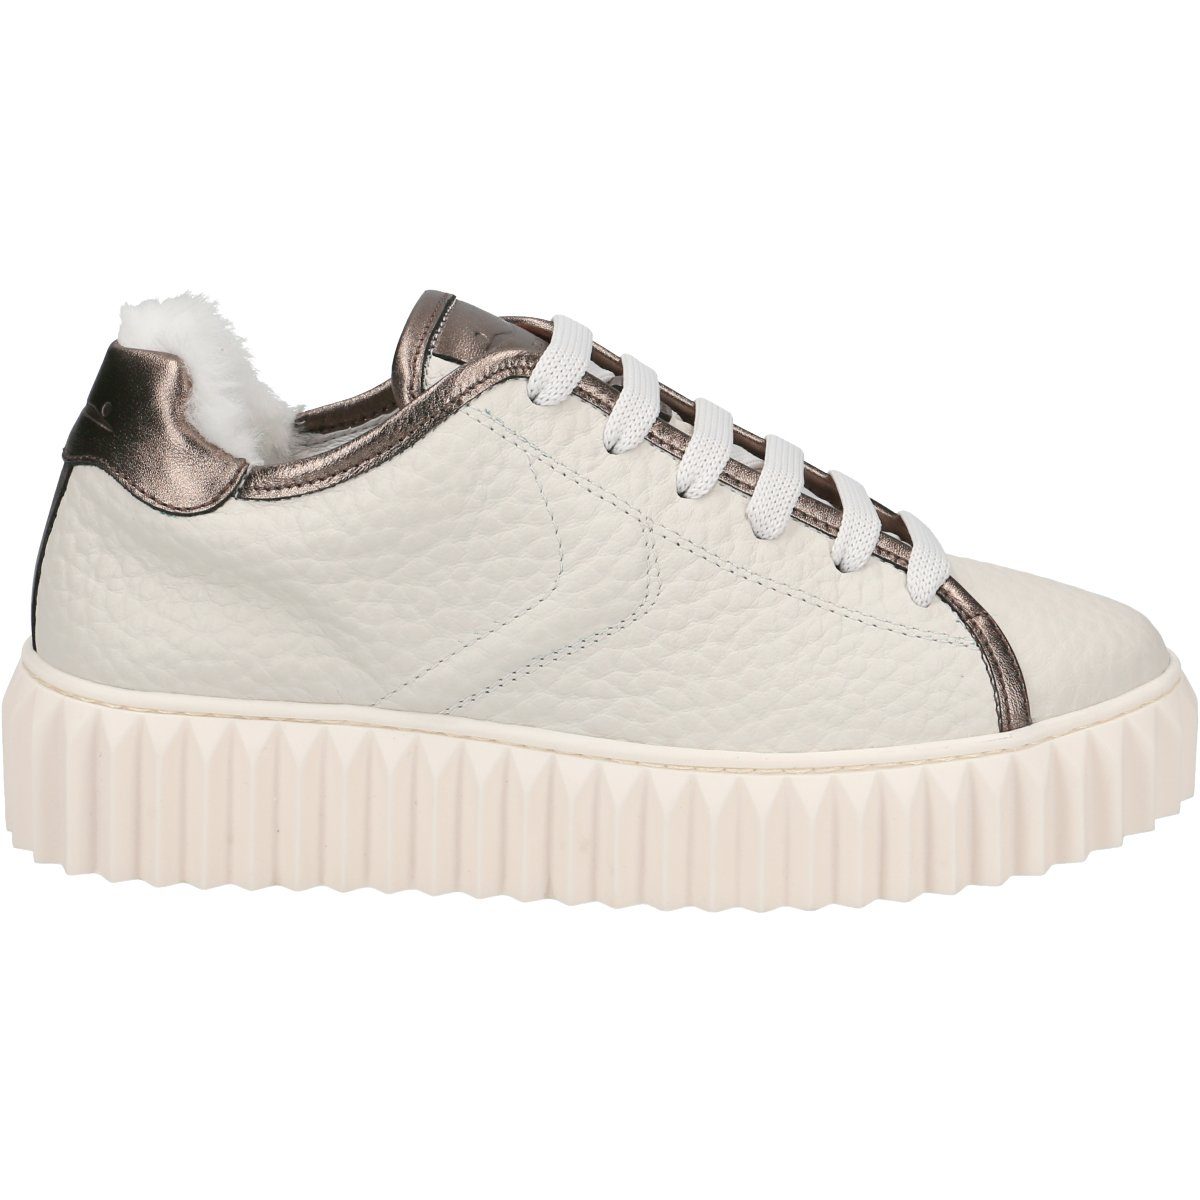 Sneaker VOILE ADELE BLANCHE